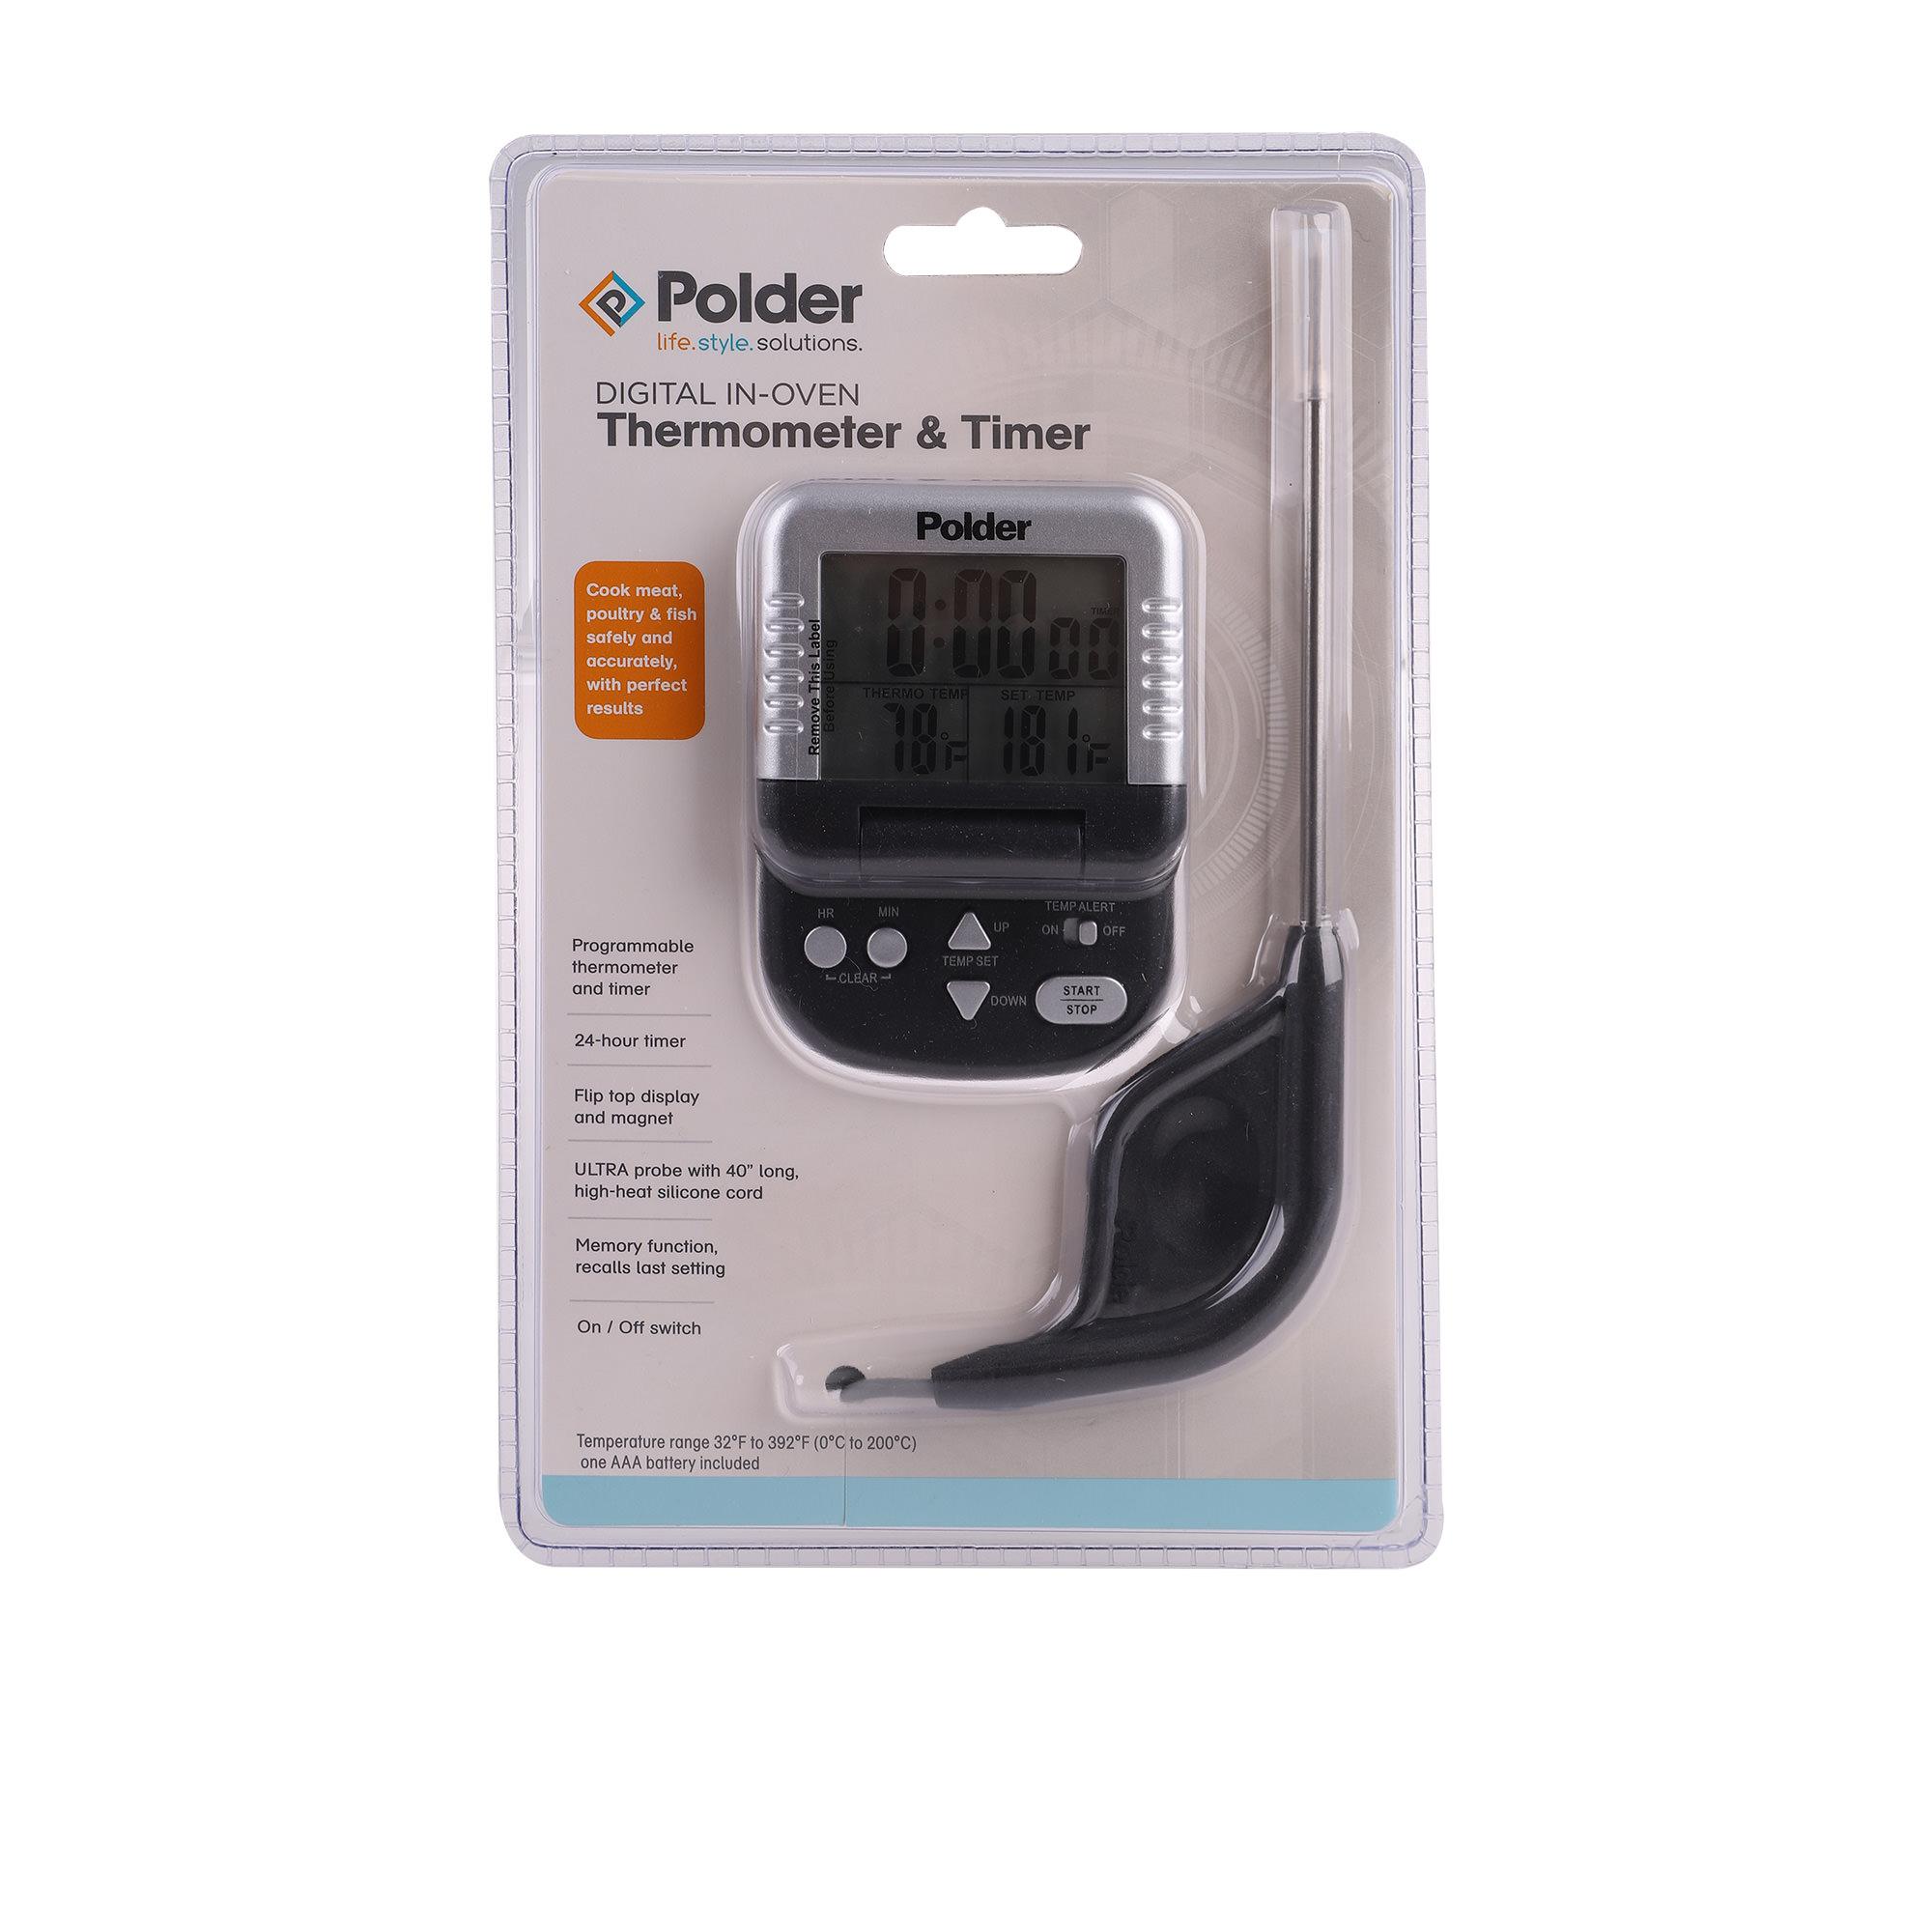 Polder Digital In Oven Thermometer & Timer Image 2